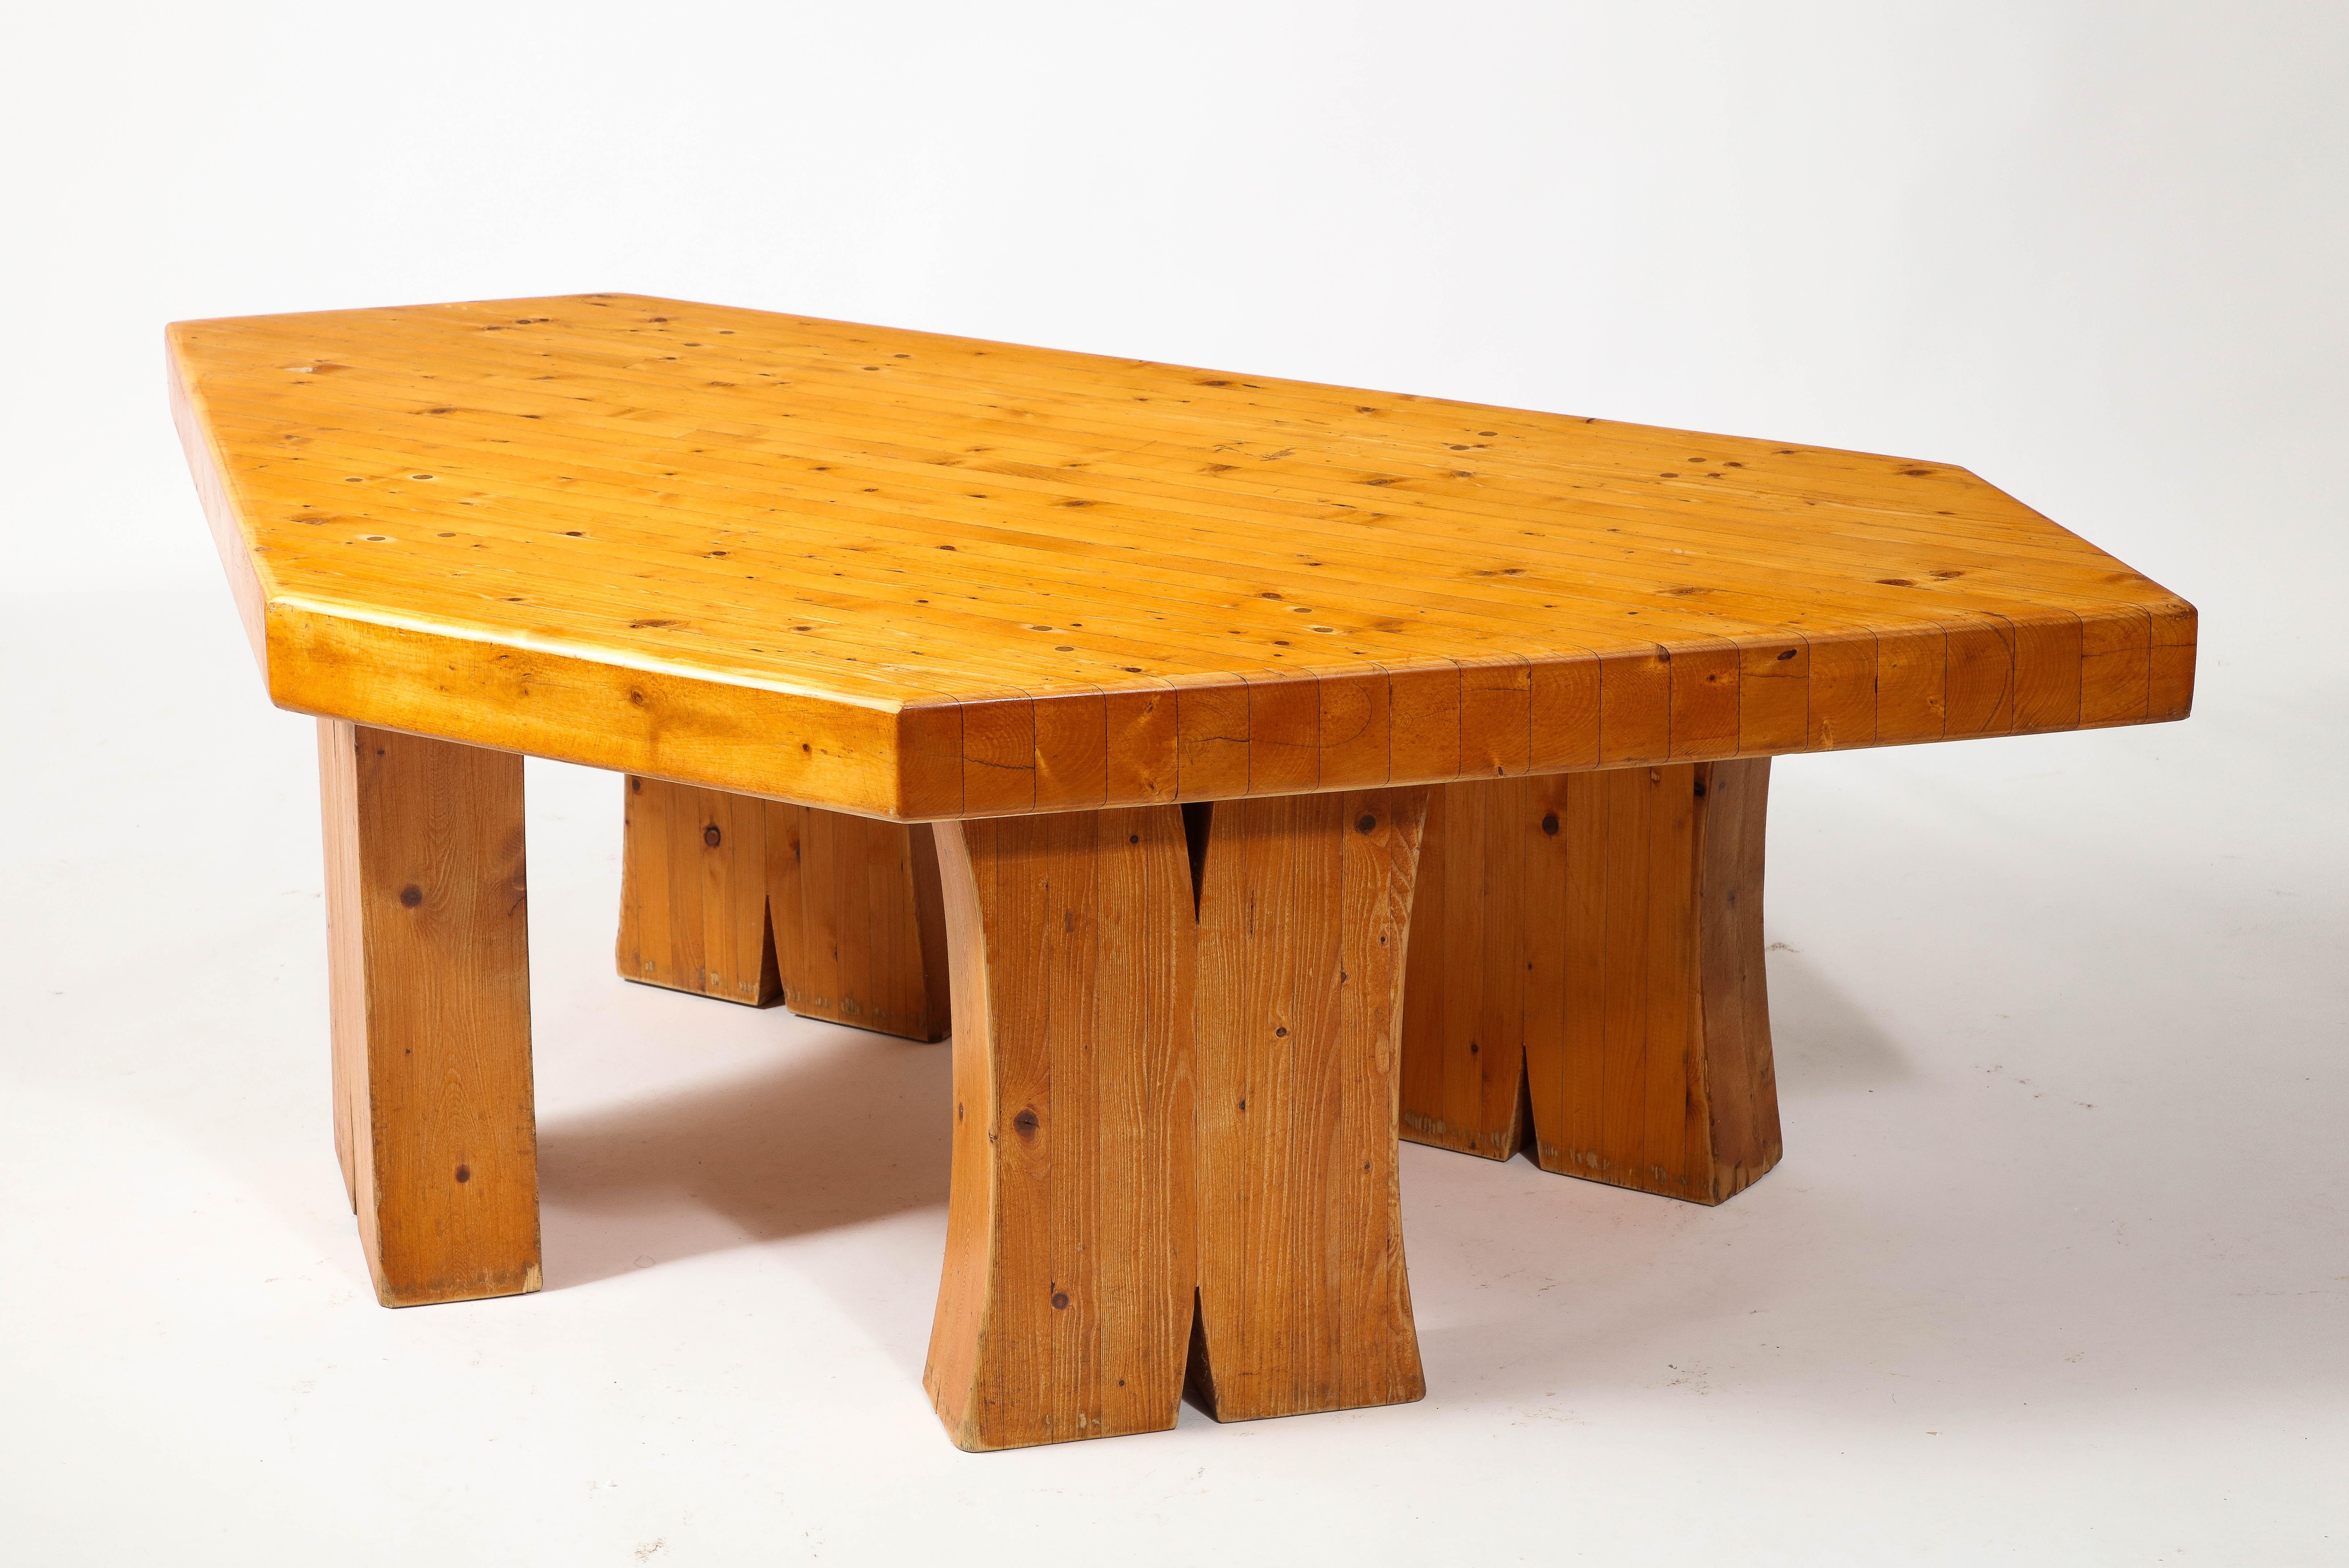 Exceptionally large solid pine table constructed in laminated planks with a thick top at almost three inches thickness. This rests on equally massive legs that end in a bifurcation. Most likely a unique studio piece. Original finish and patina.